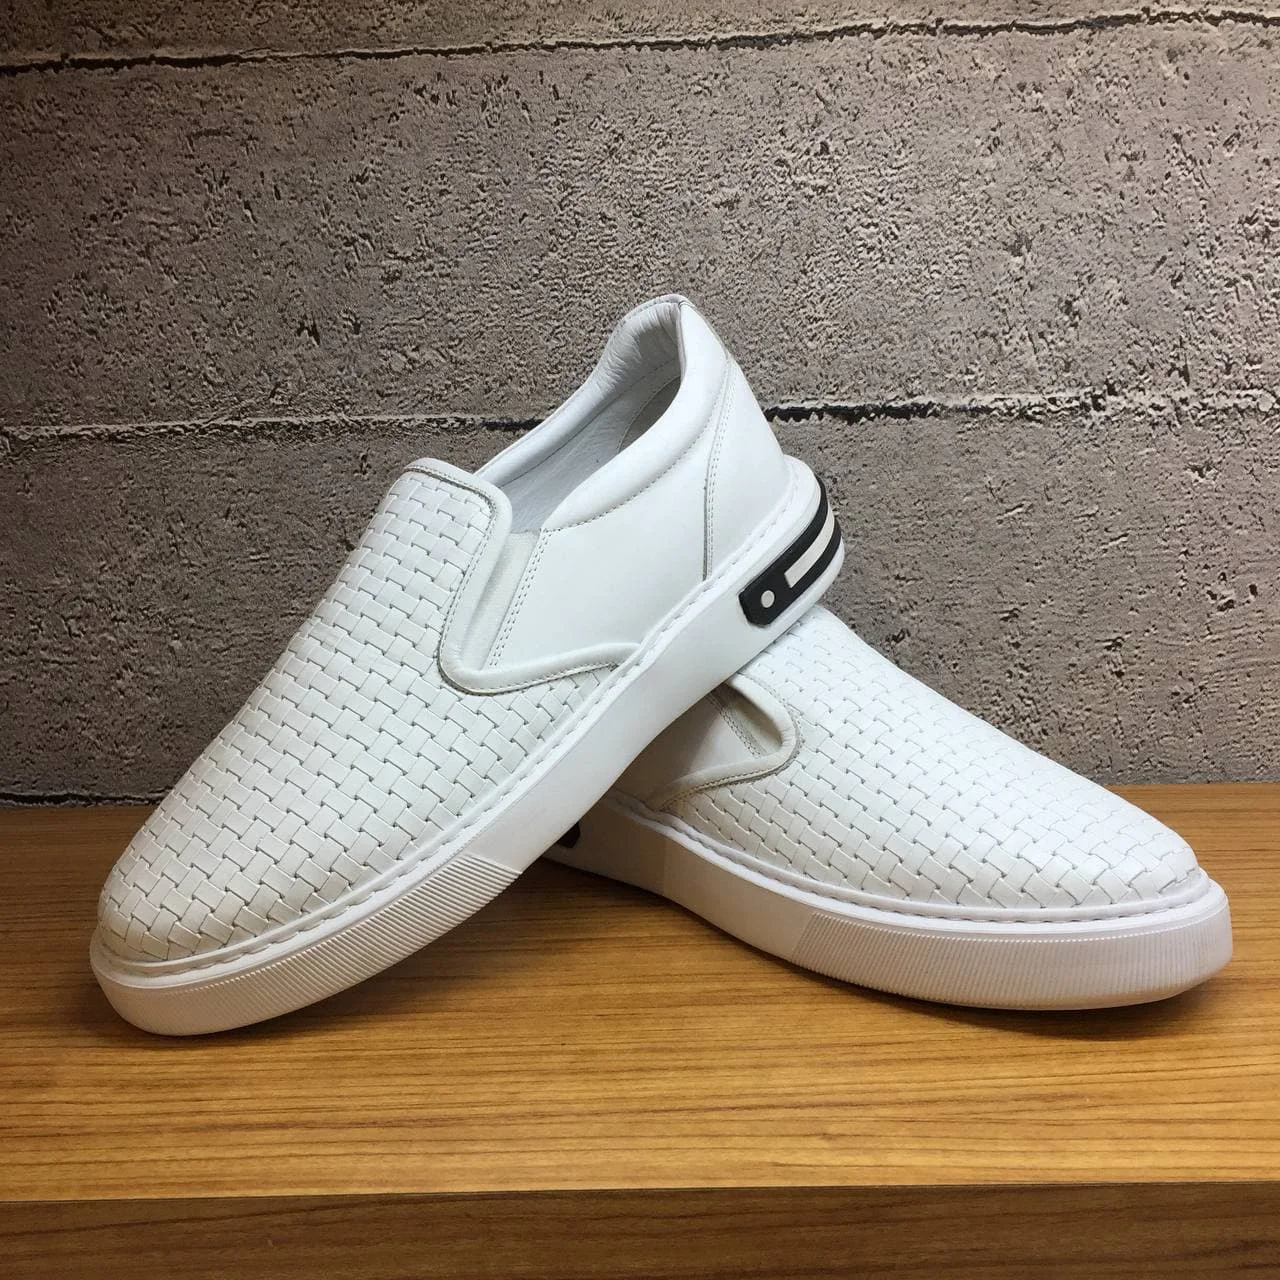 

Handmade White Sport Slip On Leather Loafers with Lightweight EVA Sole, Embossed Patterned Calf Skin, Comfort Casual Shoes